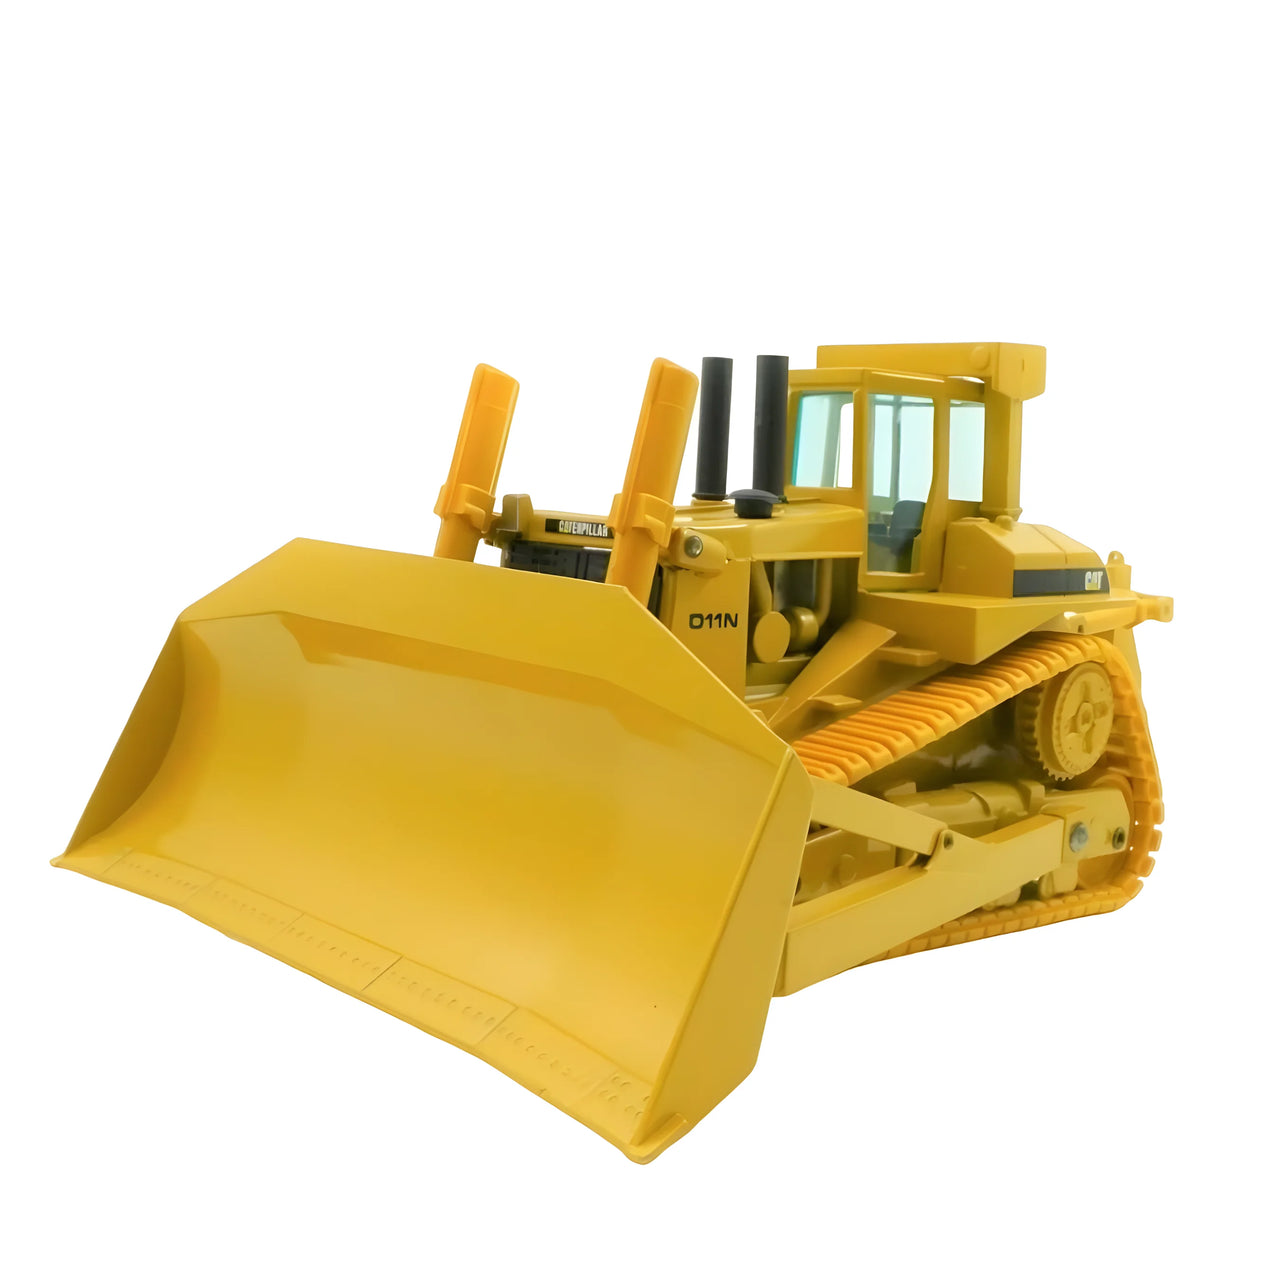 2852-0 Caterpillar D11N Crawler Tractor Scale 1:50 (Discontinued Model)